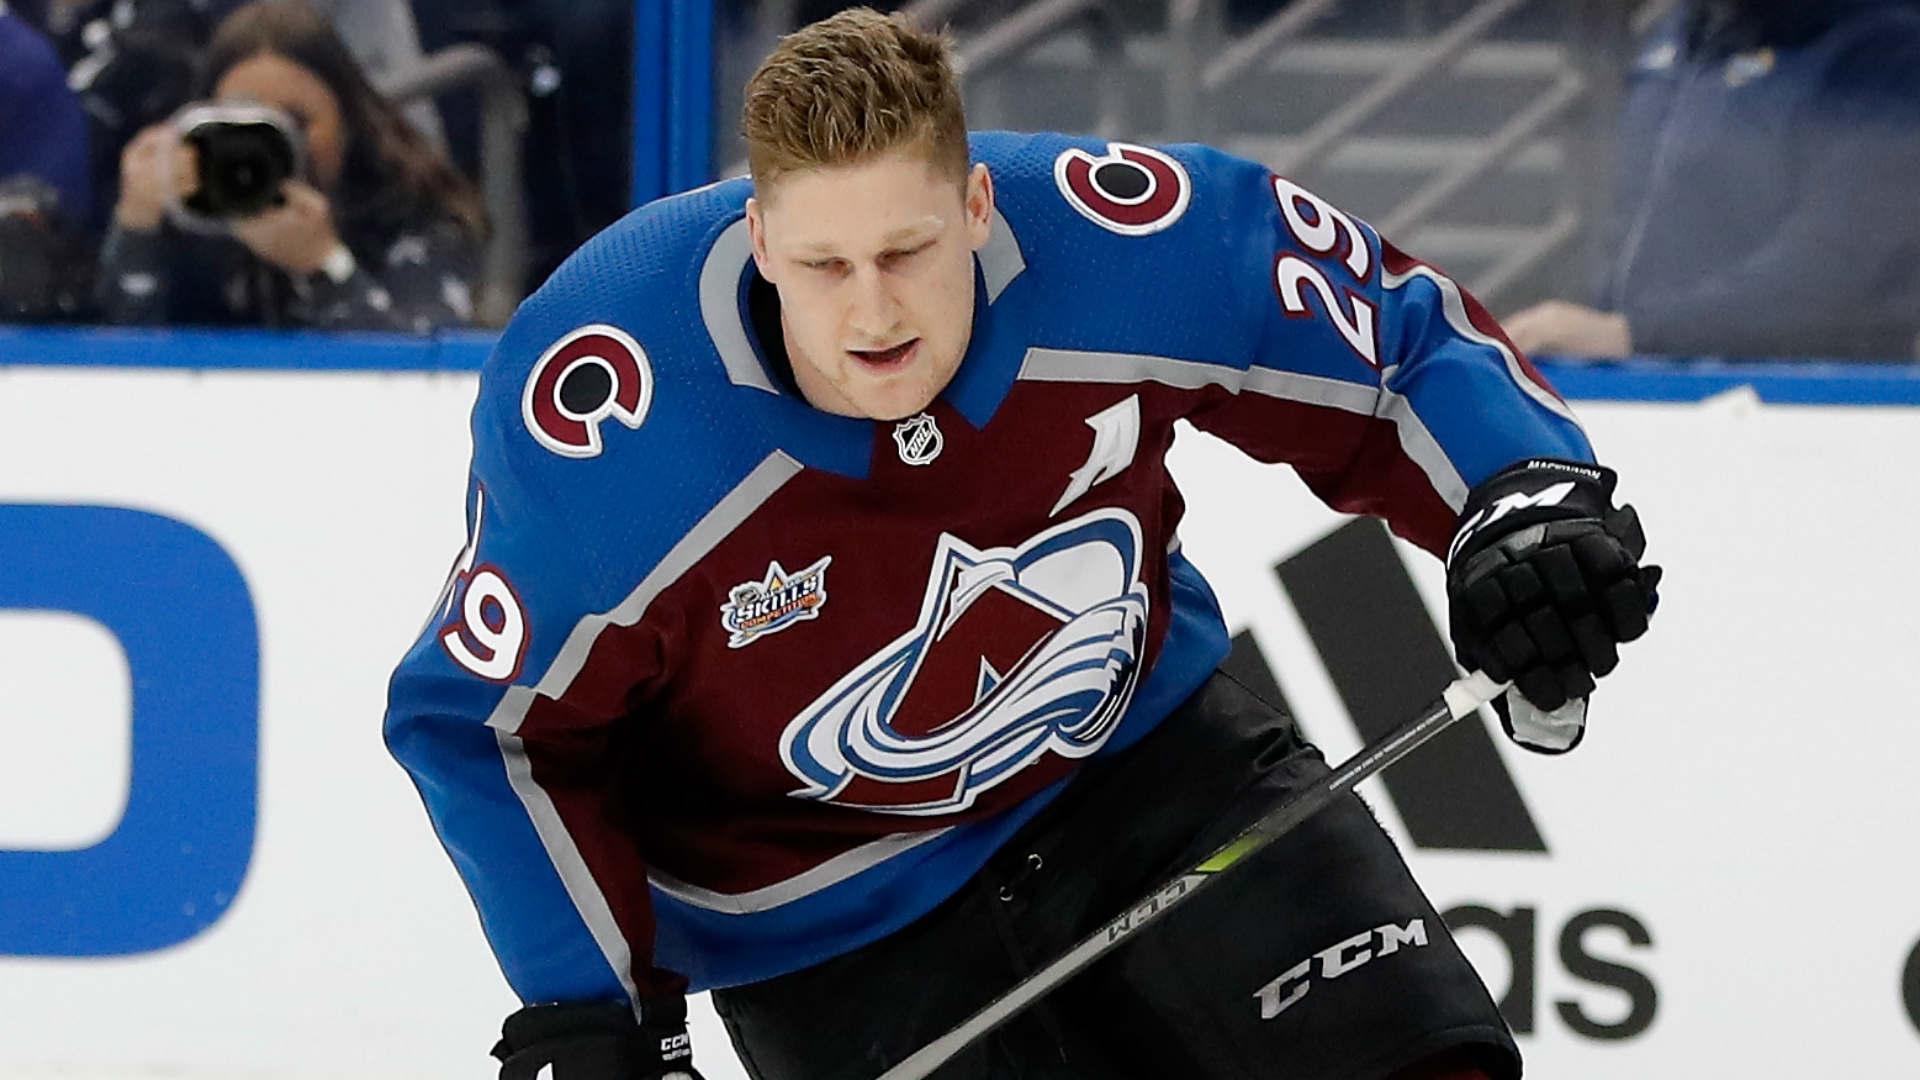 Avalanche's Nathan MacKinnon says he mishandled things in heated